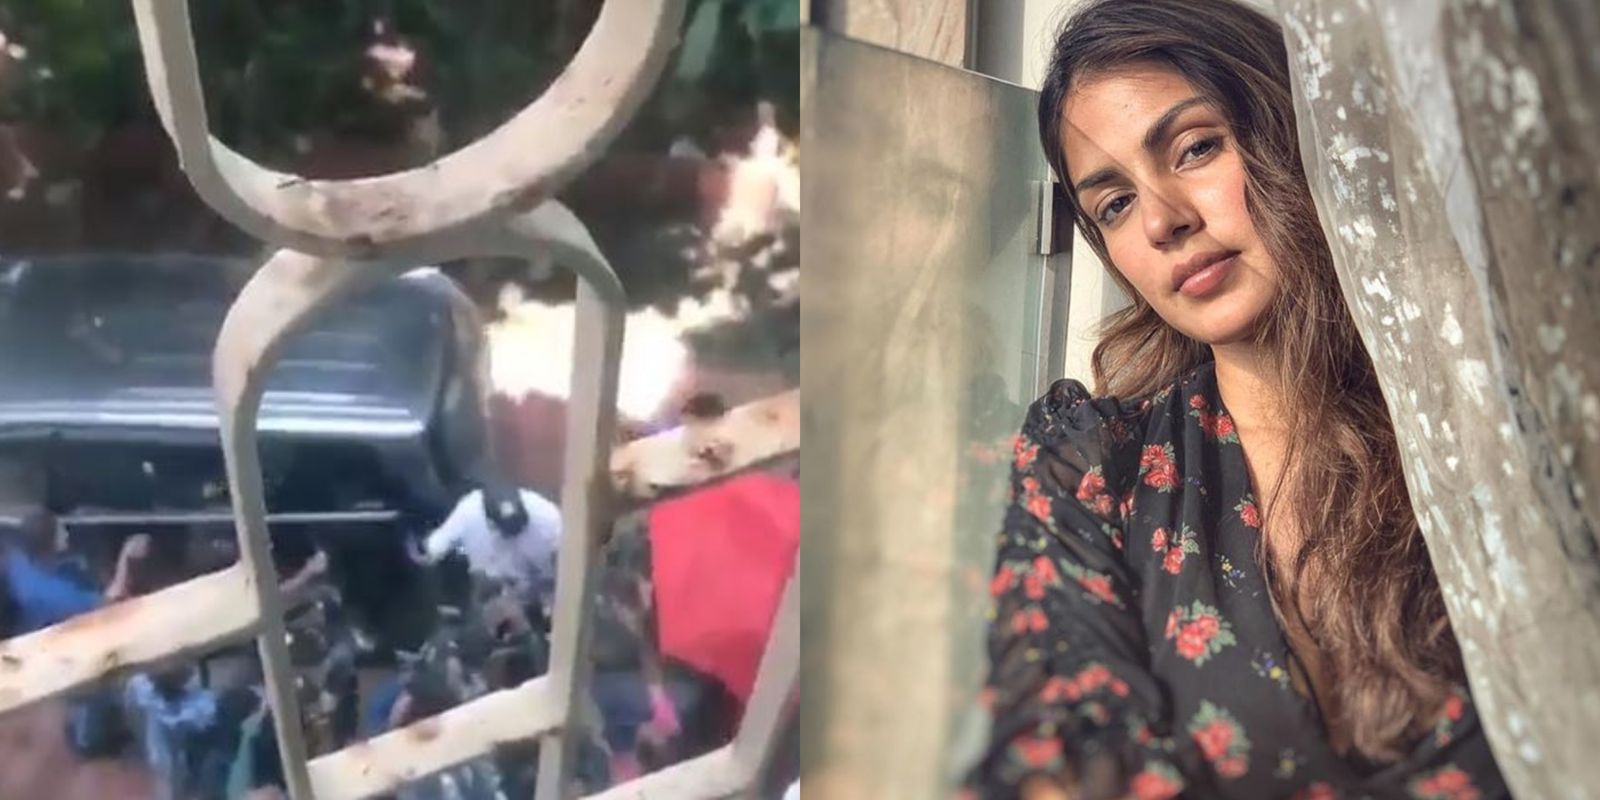 Policemen Posted Outside Rhea Chakraborty's Residence After She Claims 'There Is A Threat To My Life And My Family's Life'